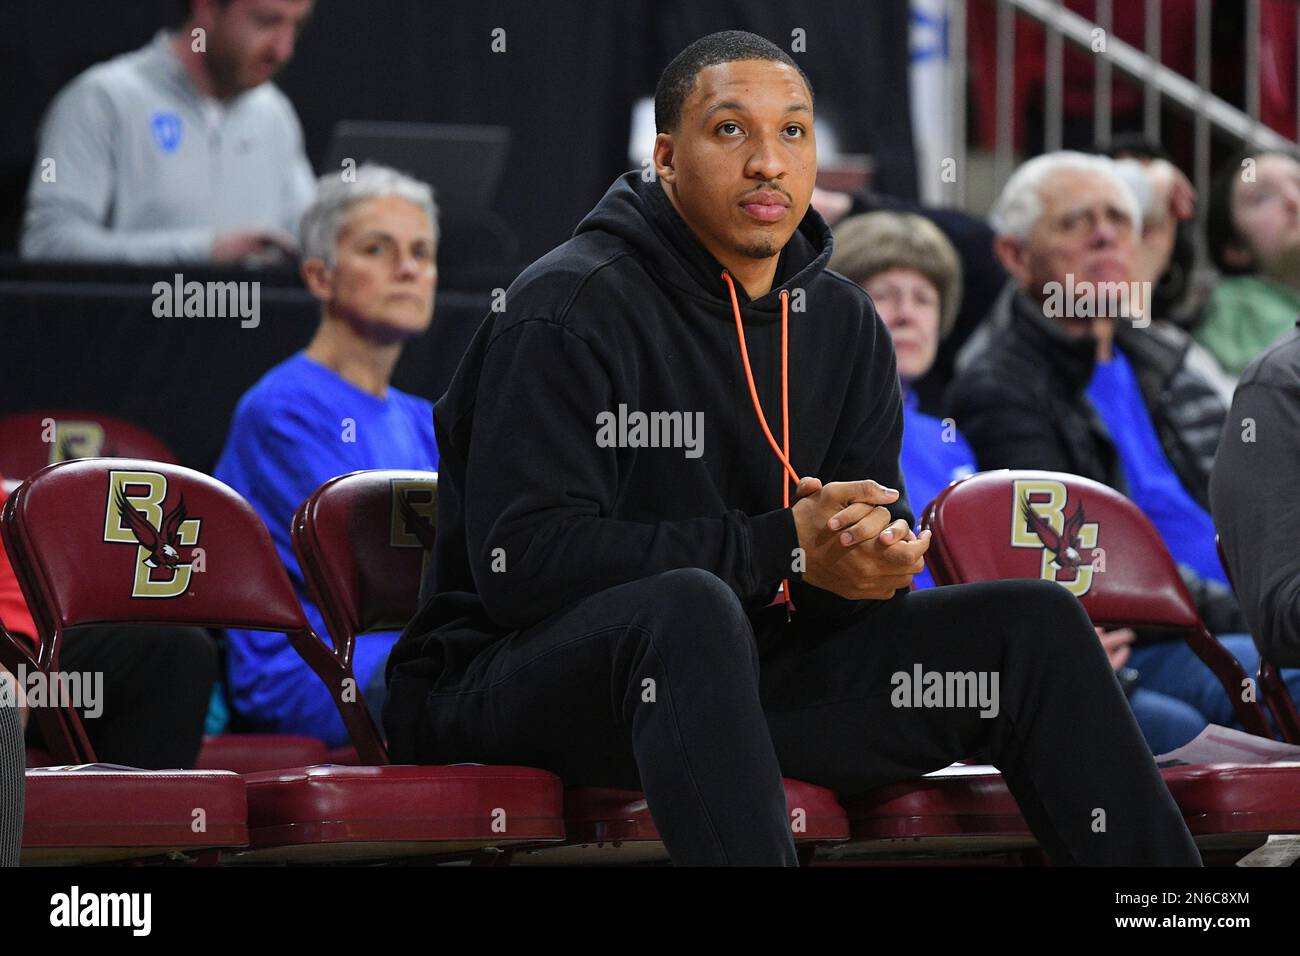 CHESTNUT HILL, MA - FEBRUARY 09: National Basketball Association (NBA)  Boston Celtics forward Grant Williams observes the action during a women's college  basketball game between the Duke Blue Devils and the Boston